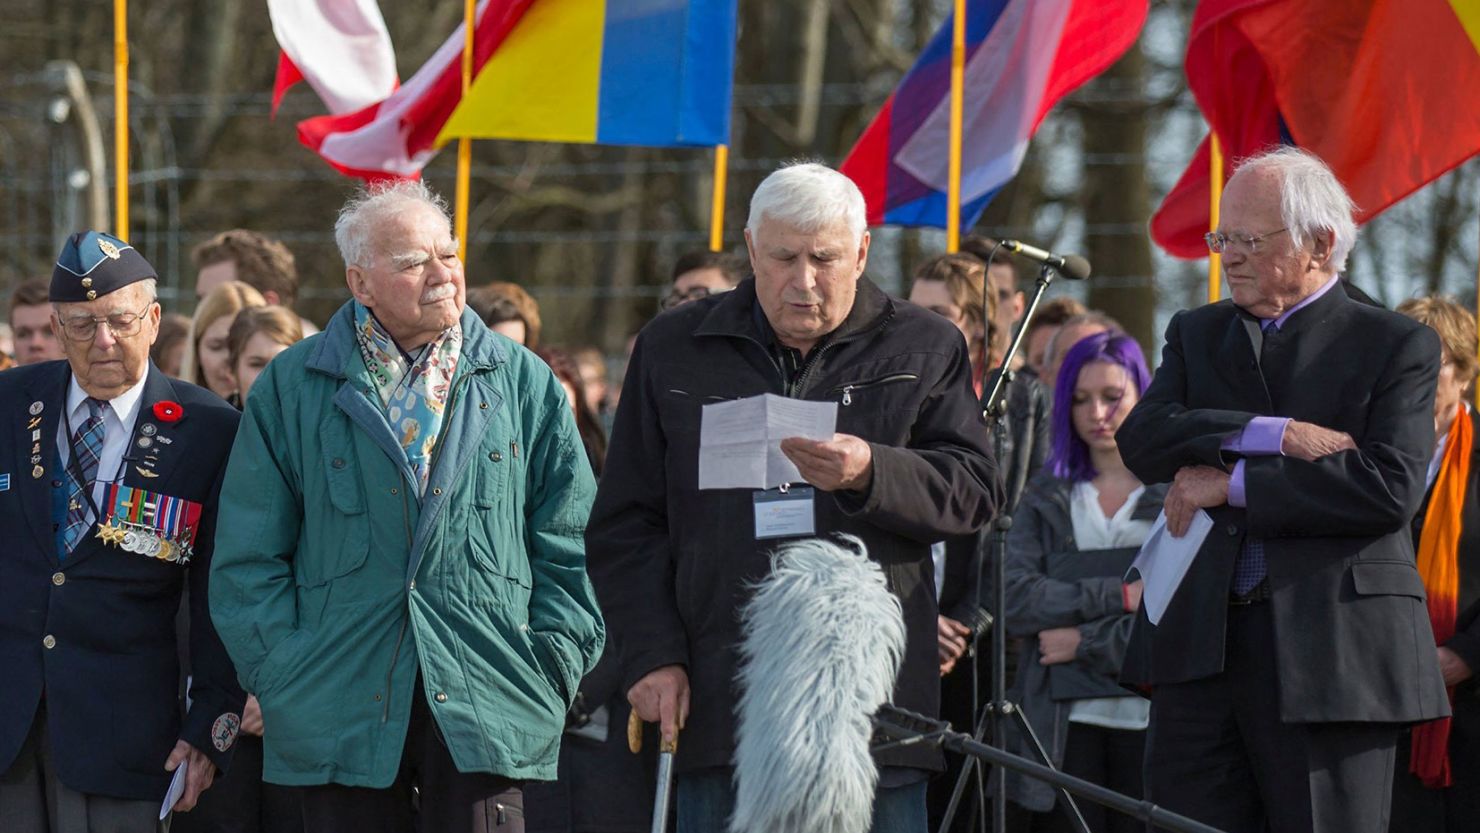 Holocaust survivor Boris Romantschenko (center) stands next to other former prisoners of the Buchenwald Nazi concentration camp during a commemoration ceremony in April, 2015.